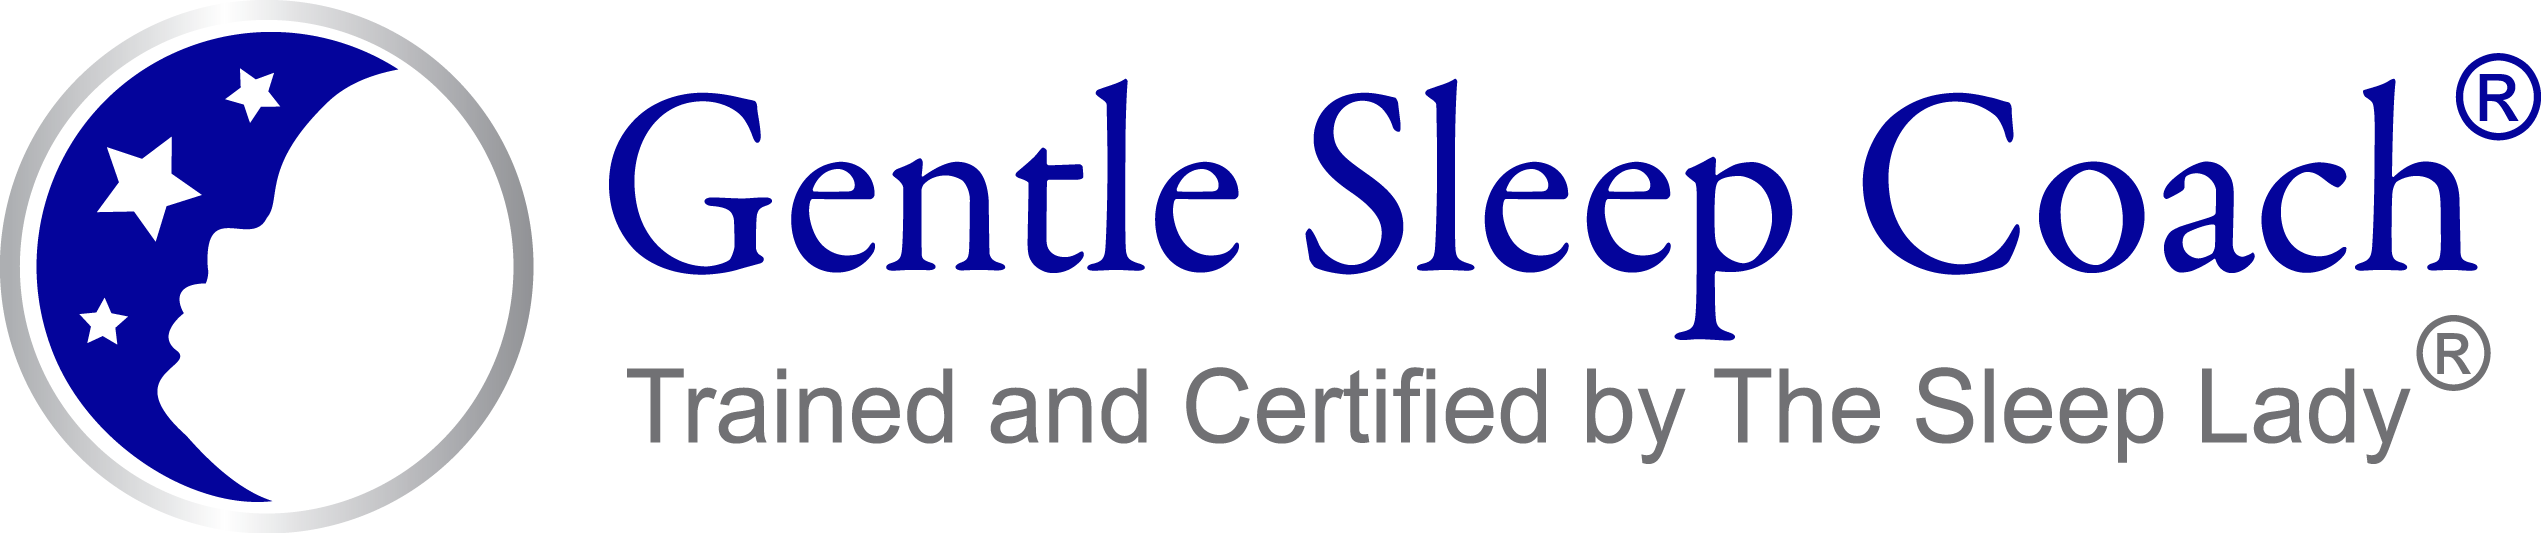 GSC logo png - How long does it take for a baby to fall asleep?